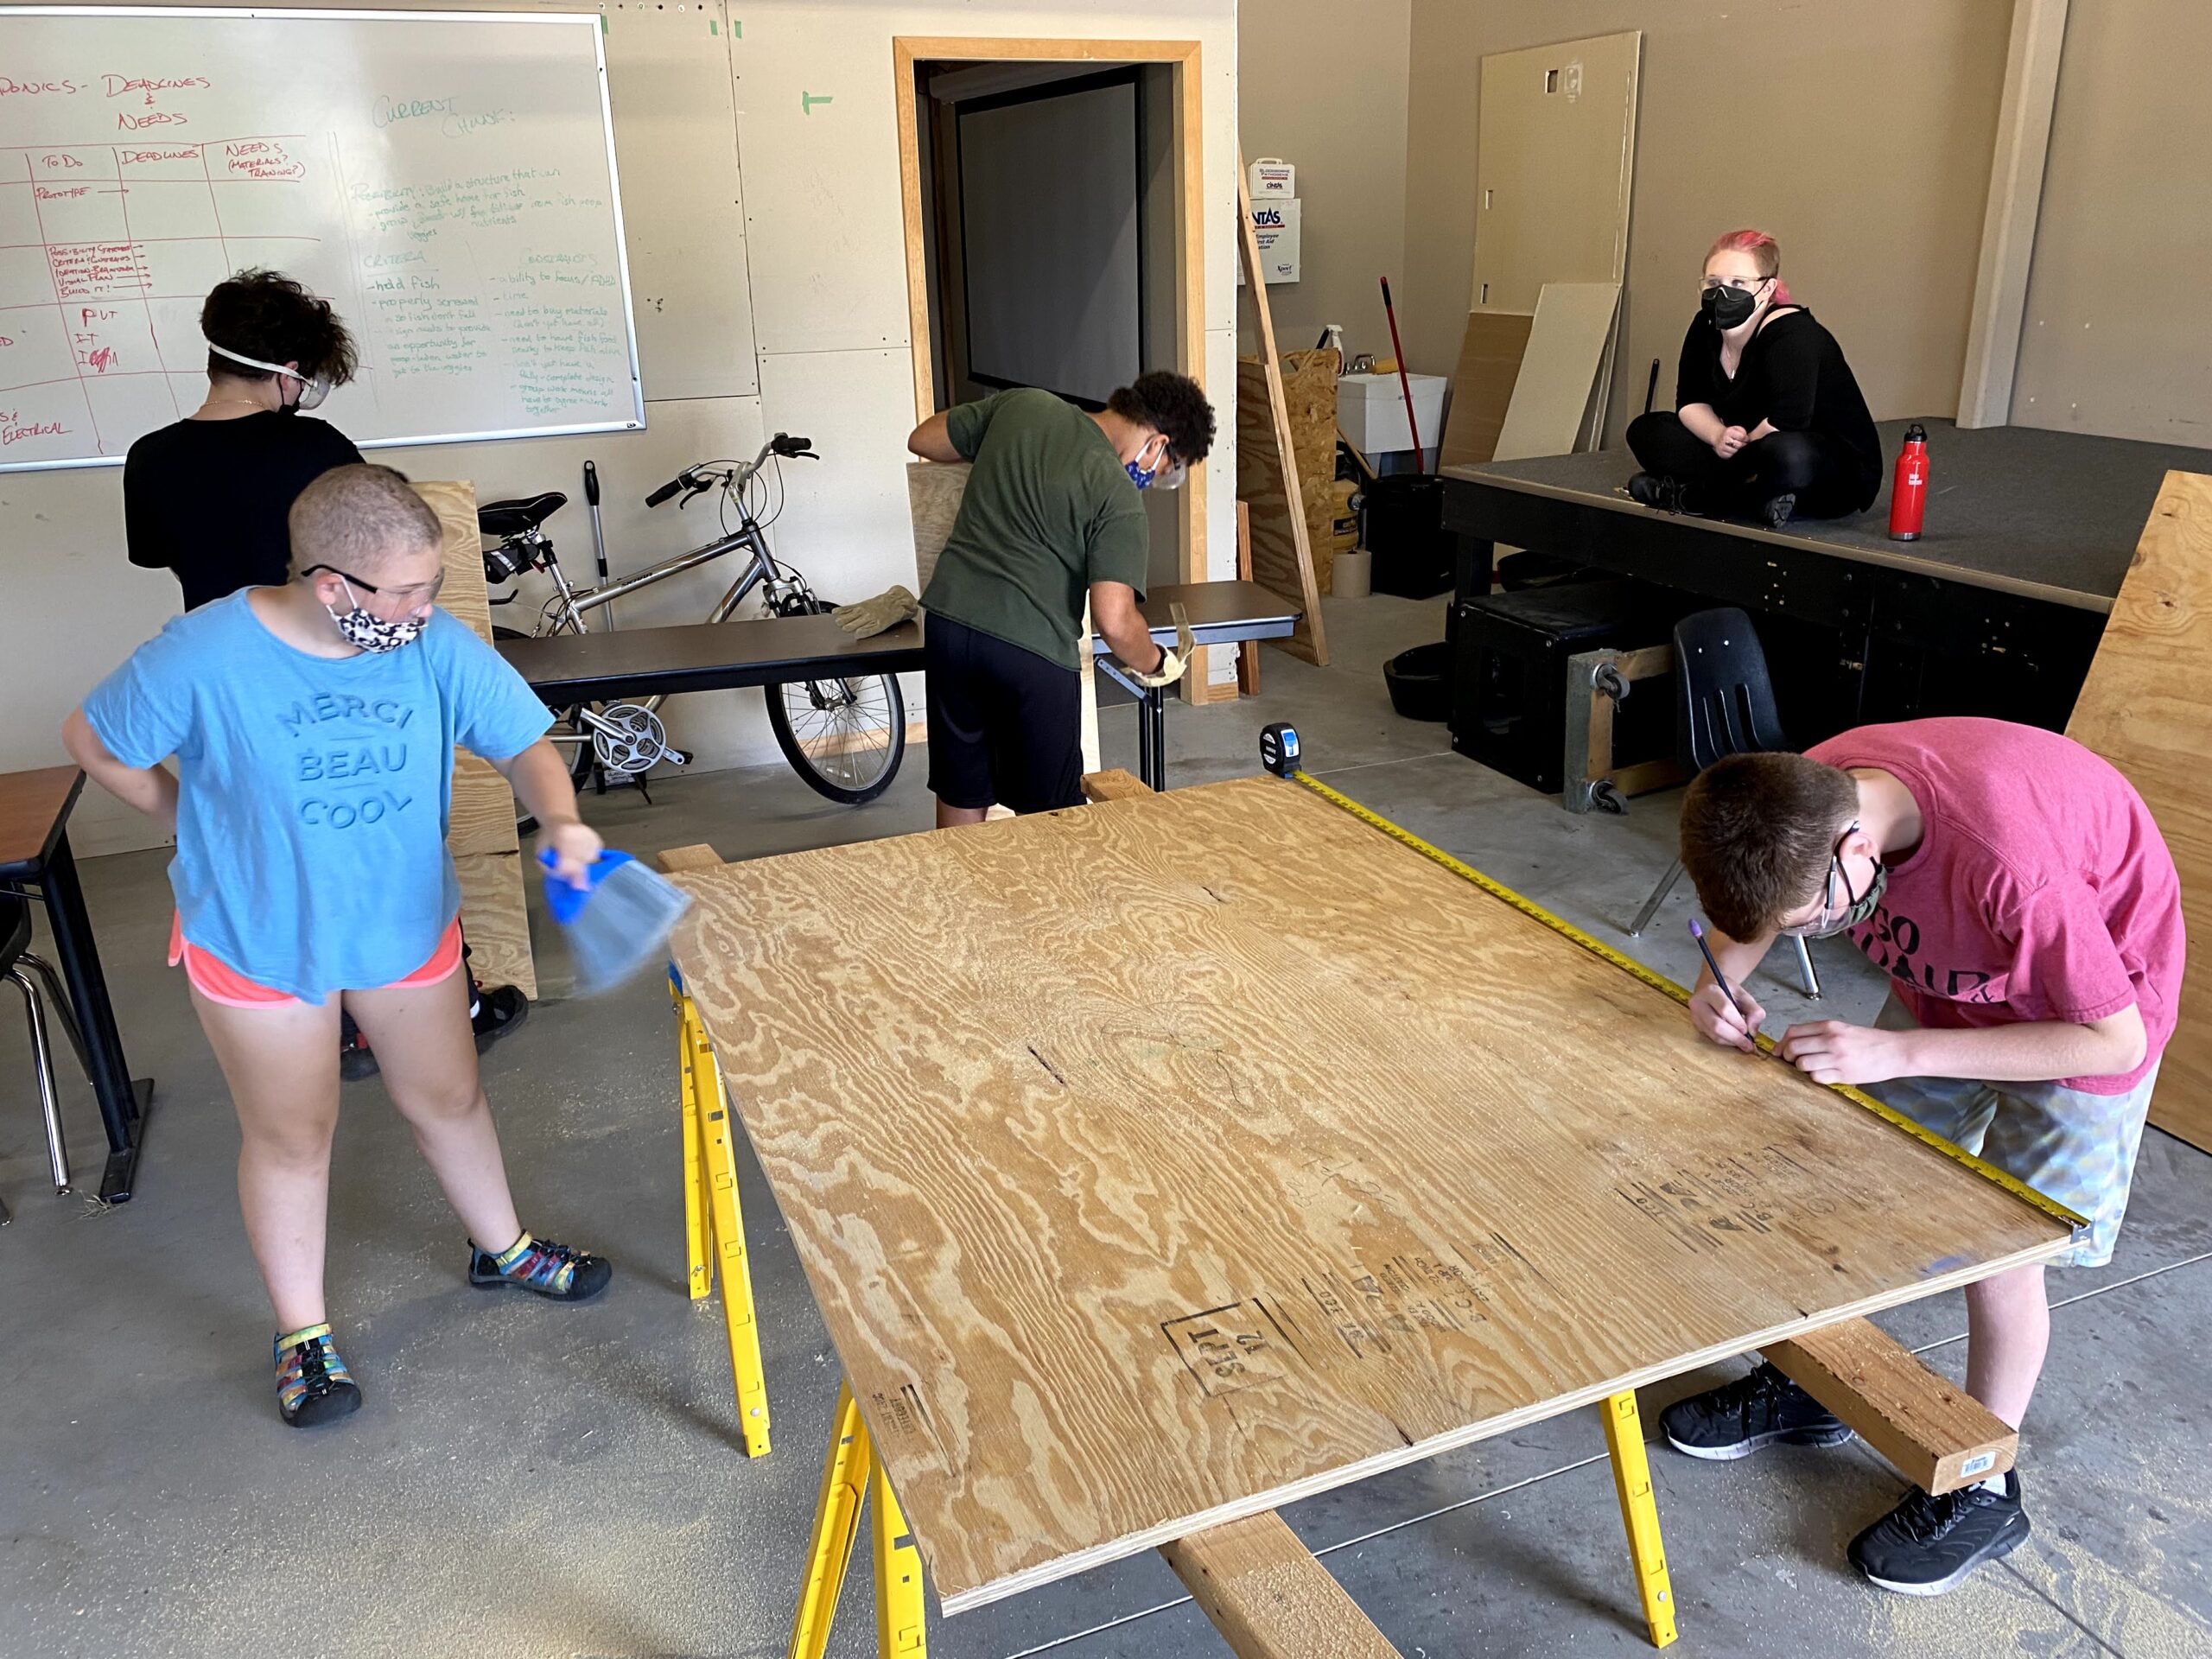 Students in the maker space measuring a sheet of plywood.